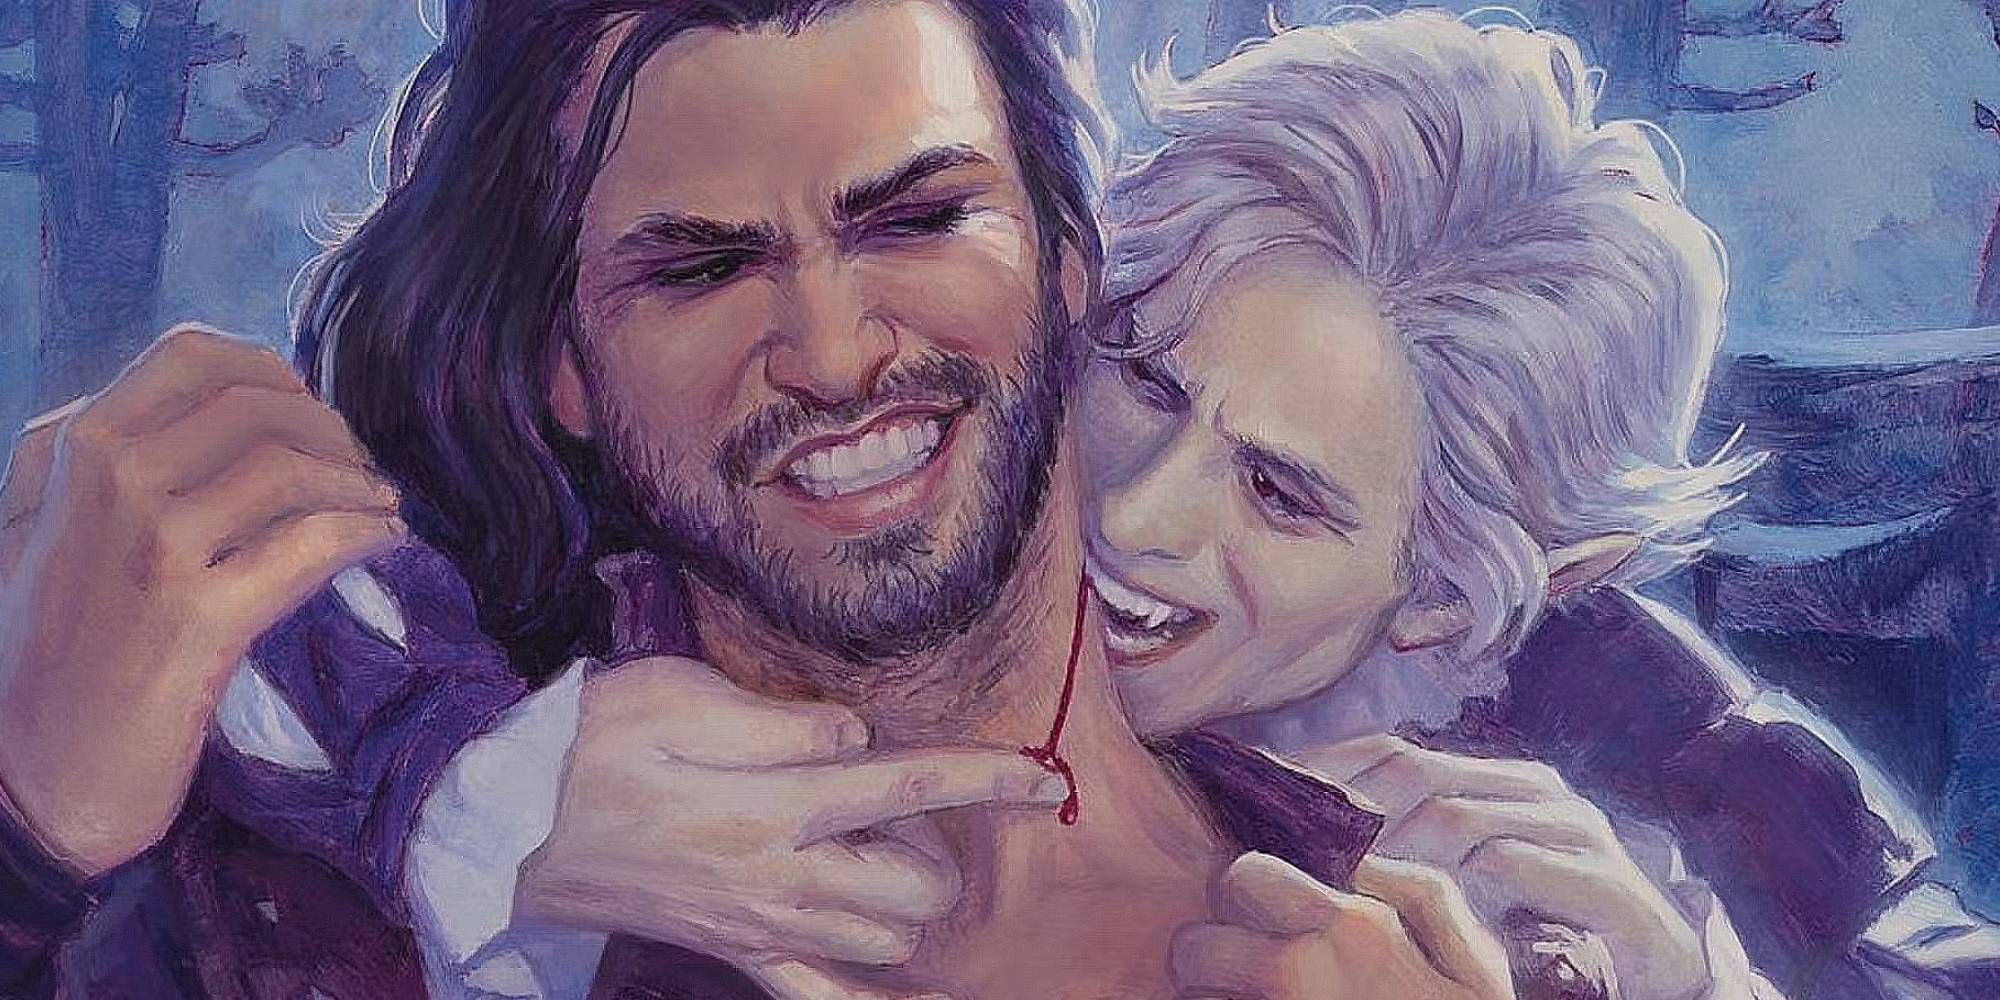 A pale haired vampire bites at the neck of a handsome humanoid male